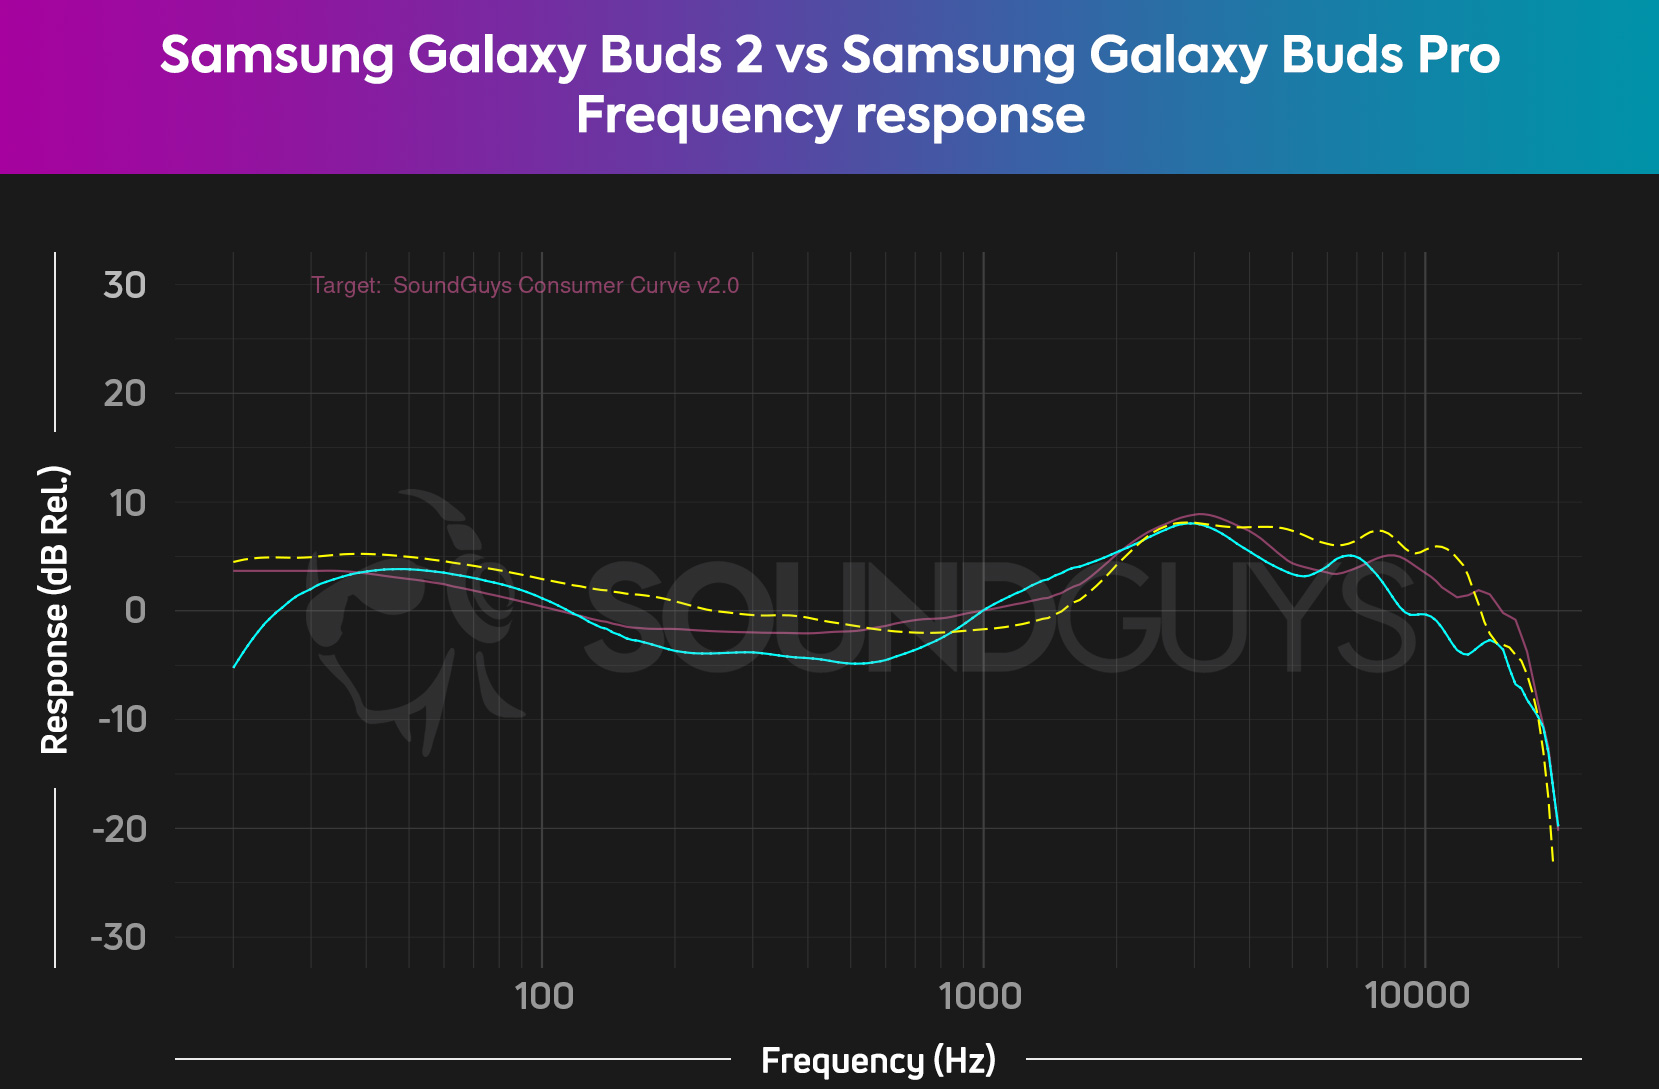 A chart depicts the Samsung Galaxy Buds 2 (cyan) and Samsung Galaxy Buds Pro (yellow dash) frequency responses relative to the SoundGuys Consumer Curve V2.0.